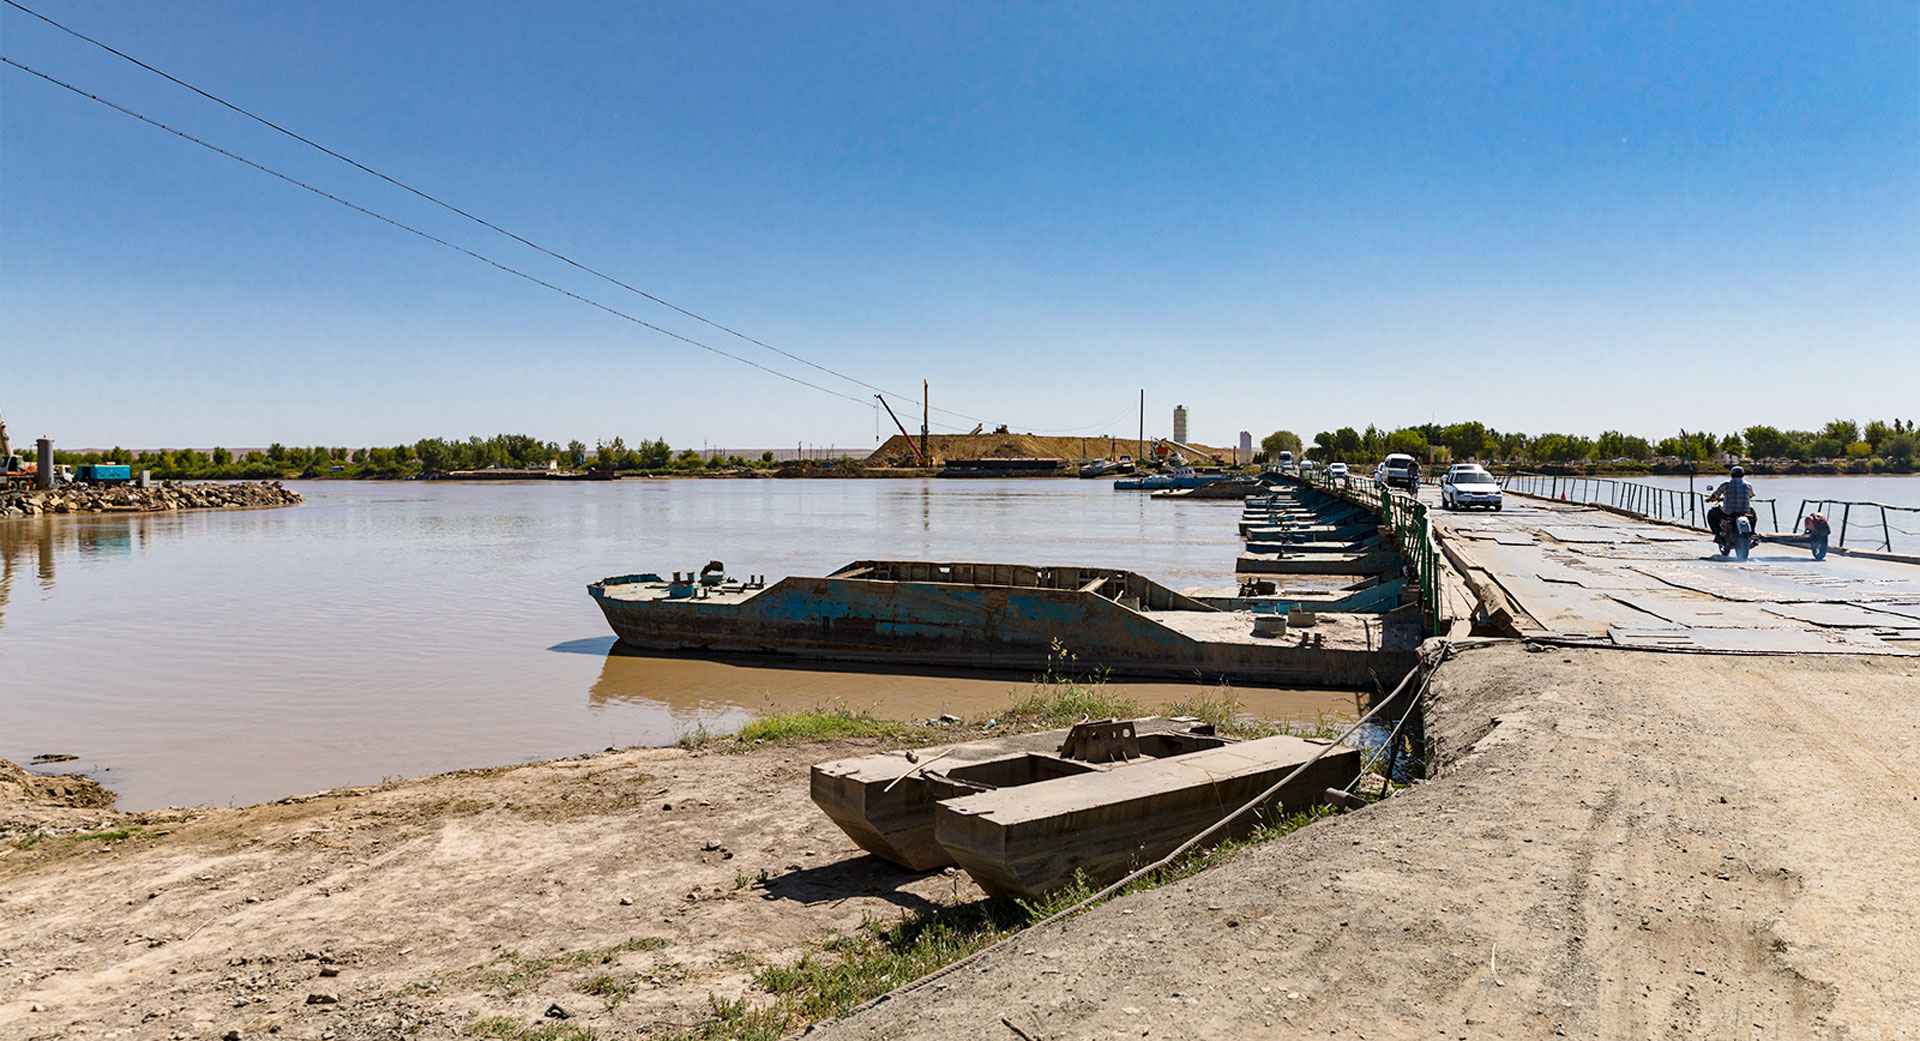 A view of the Amu Darya river, part of the life blood of the Aral Sea basin.